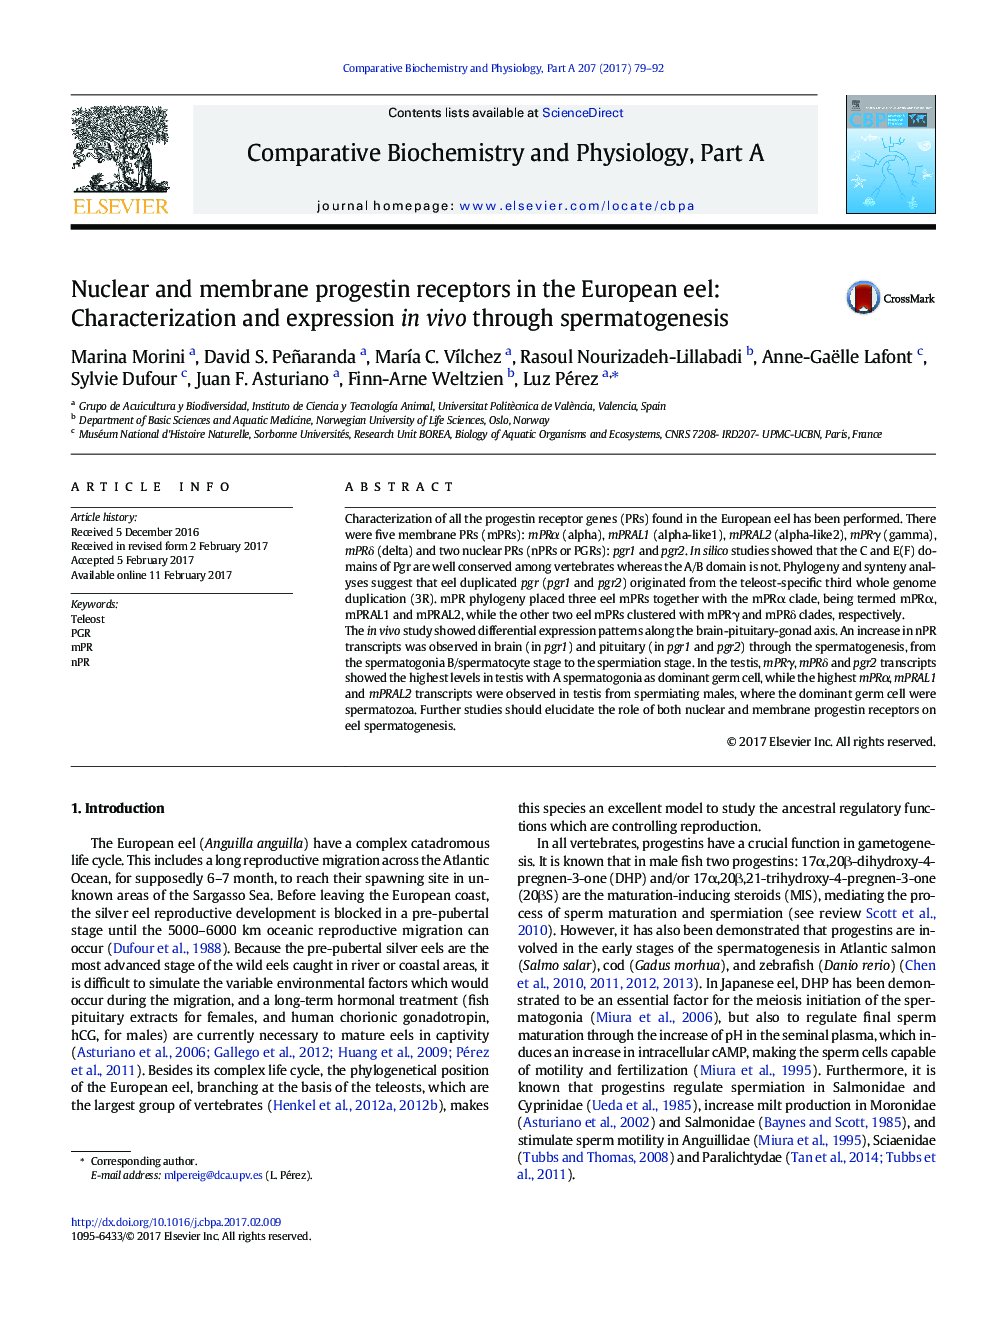 Nuclear and membrane progestin receptors in the European eel: Characterization and expression in vivo through spermatogenesis